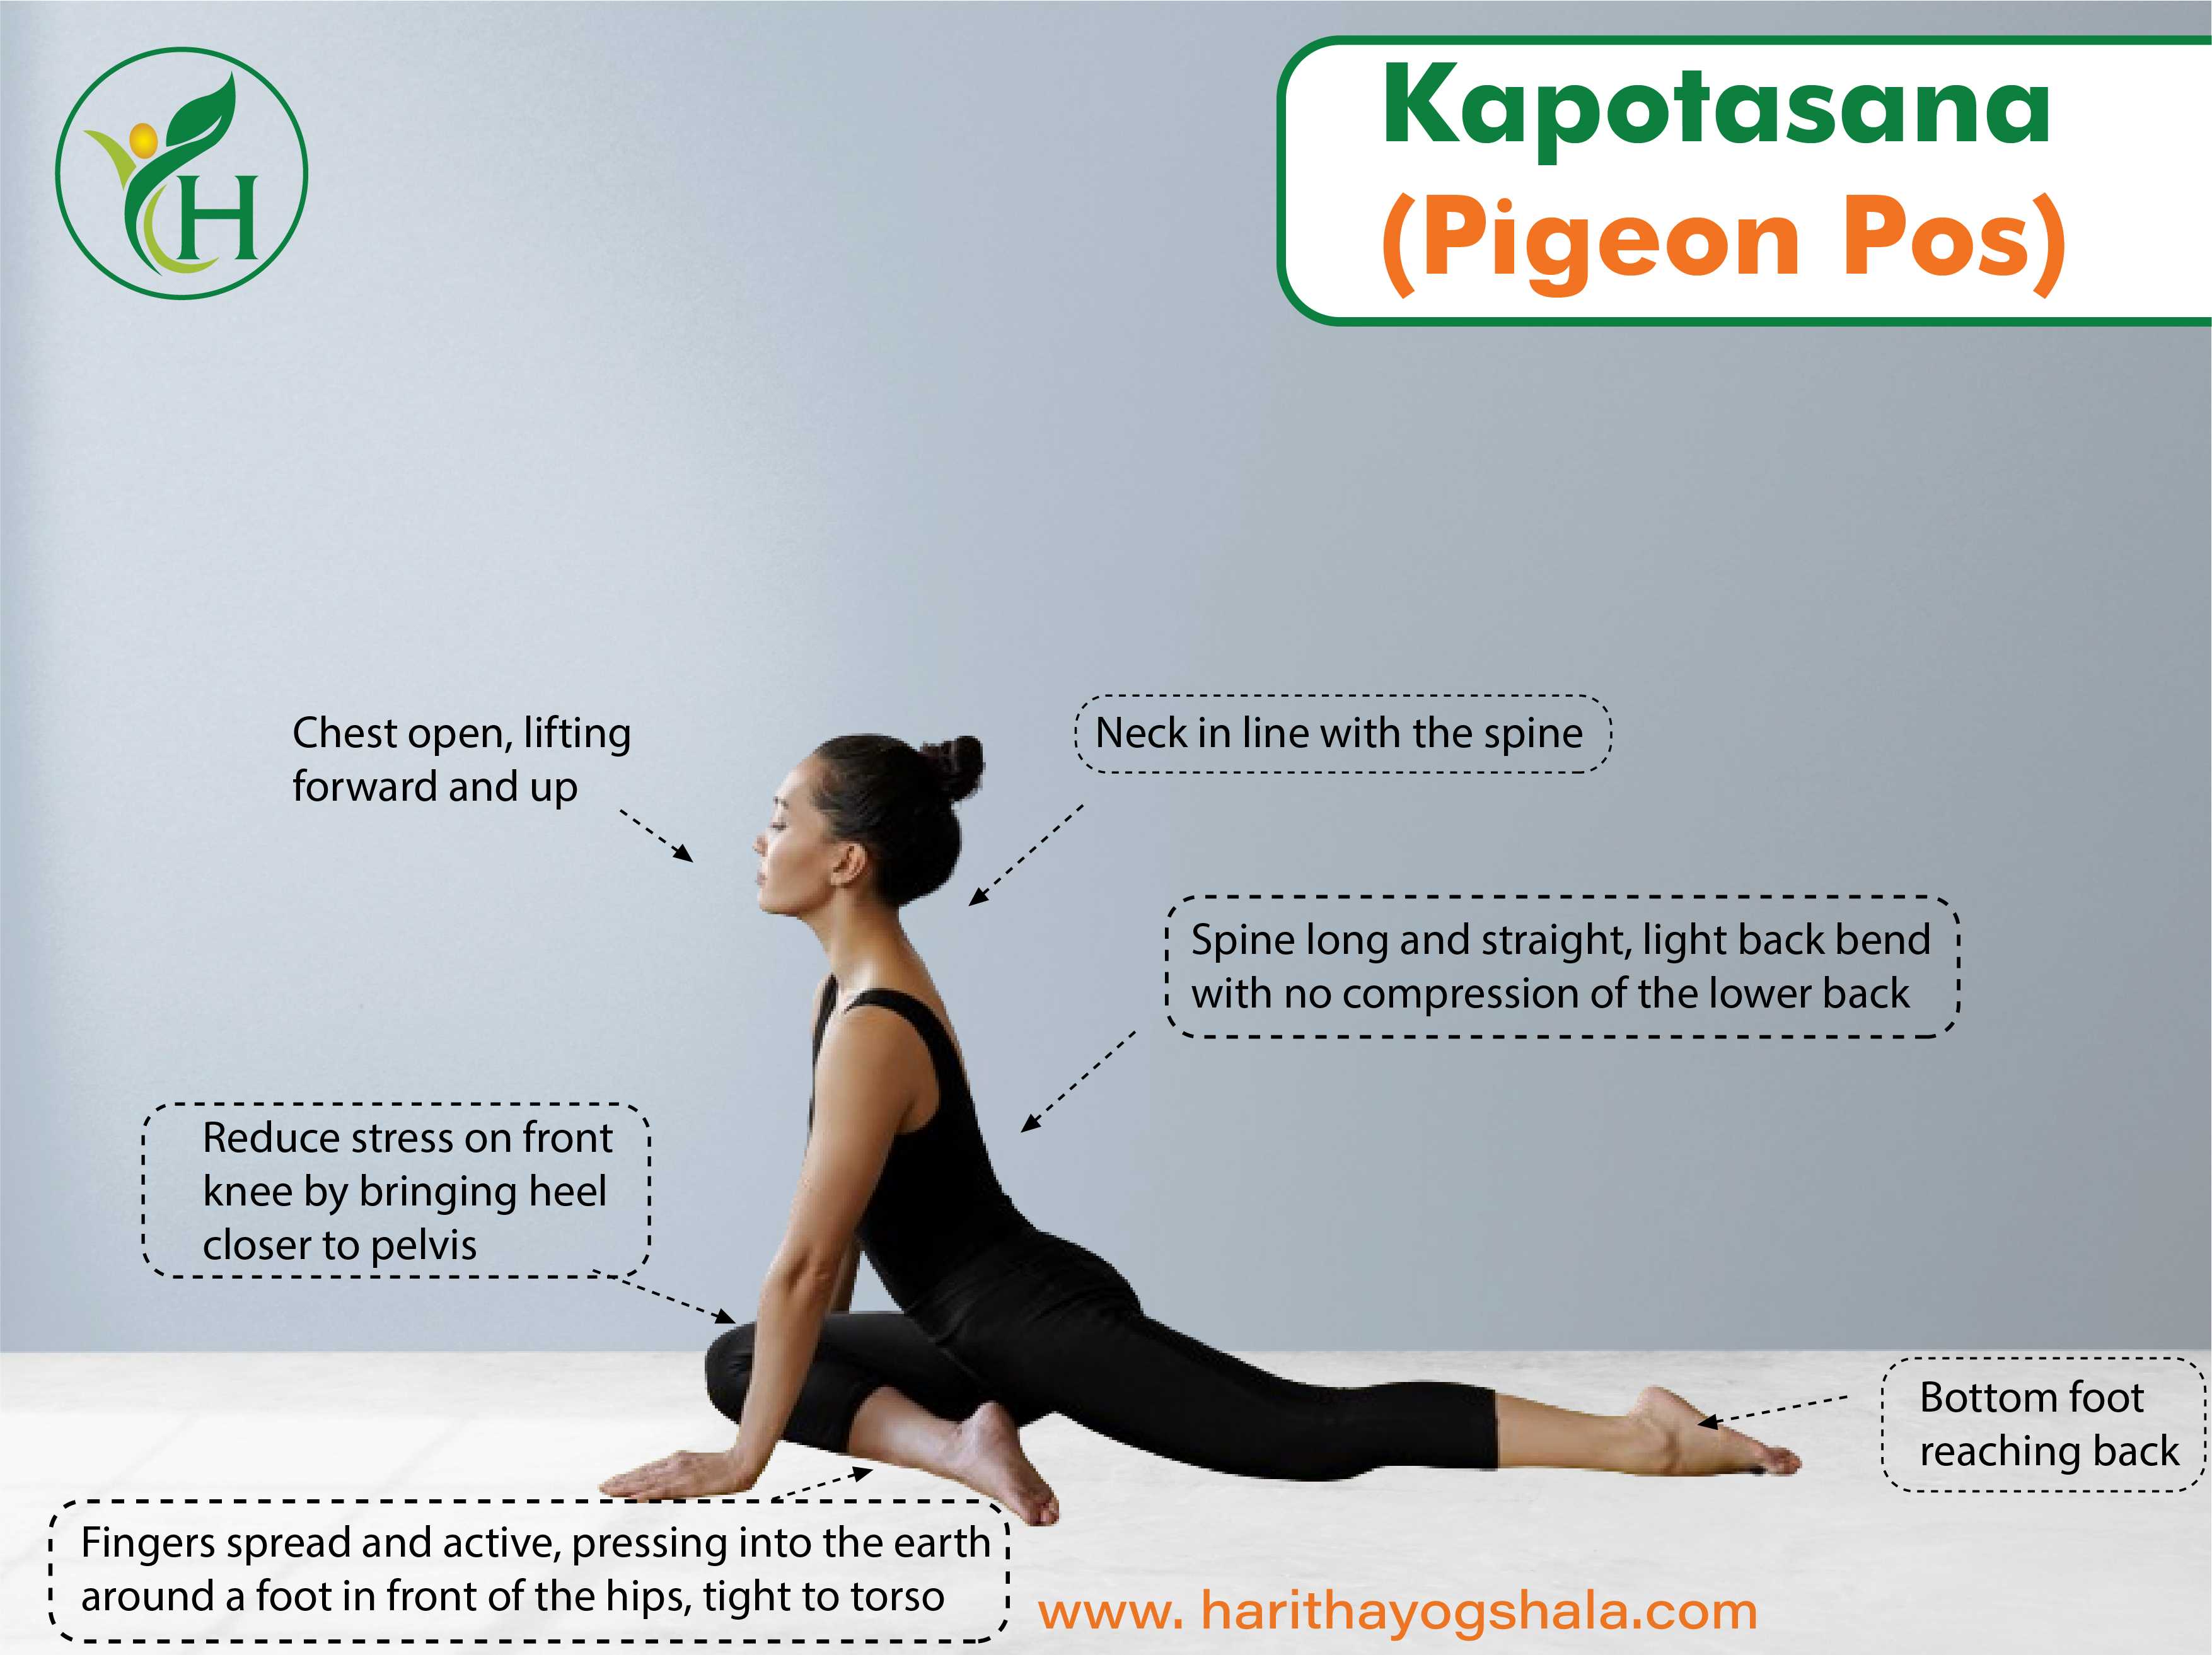 A person practicing Kapotasana Yoga, also known as Pigeon Pose, demonstrating flexibility and strength in their yoga practice